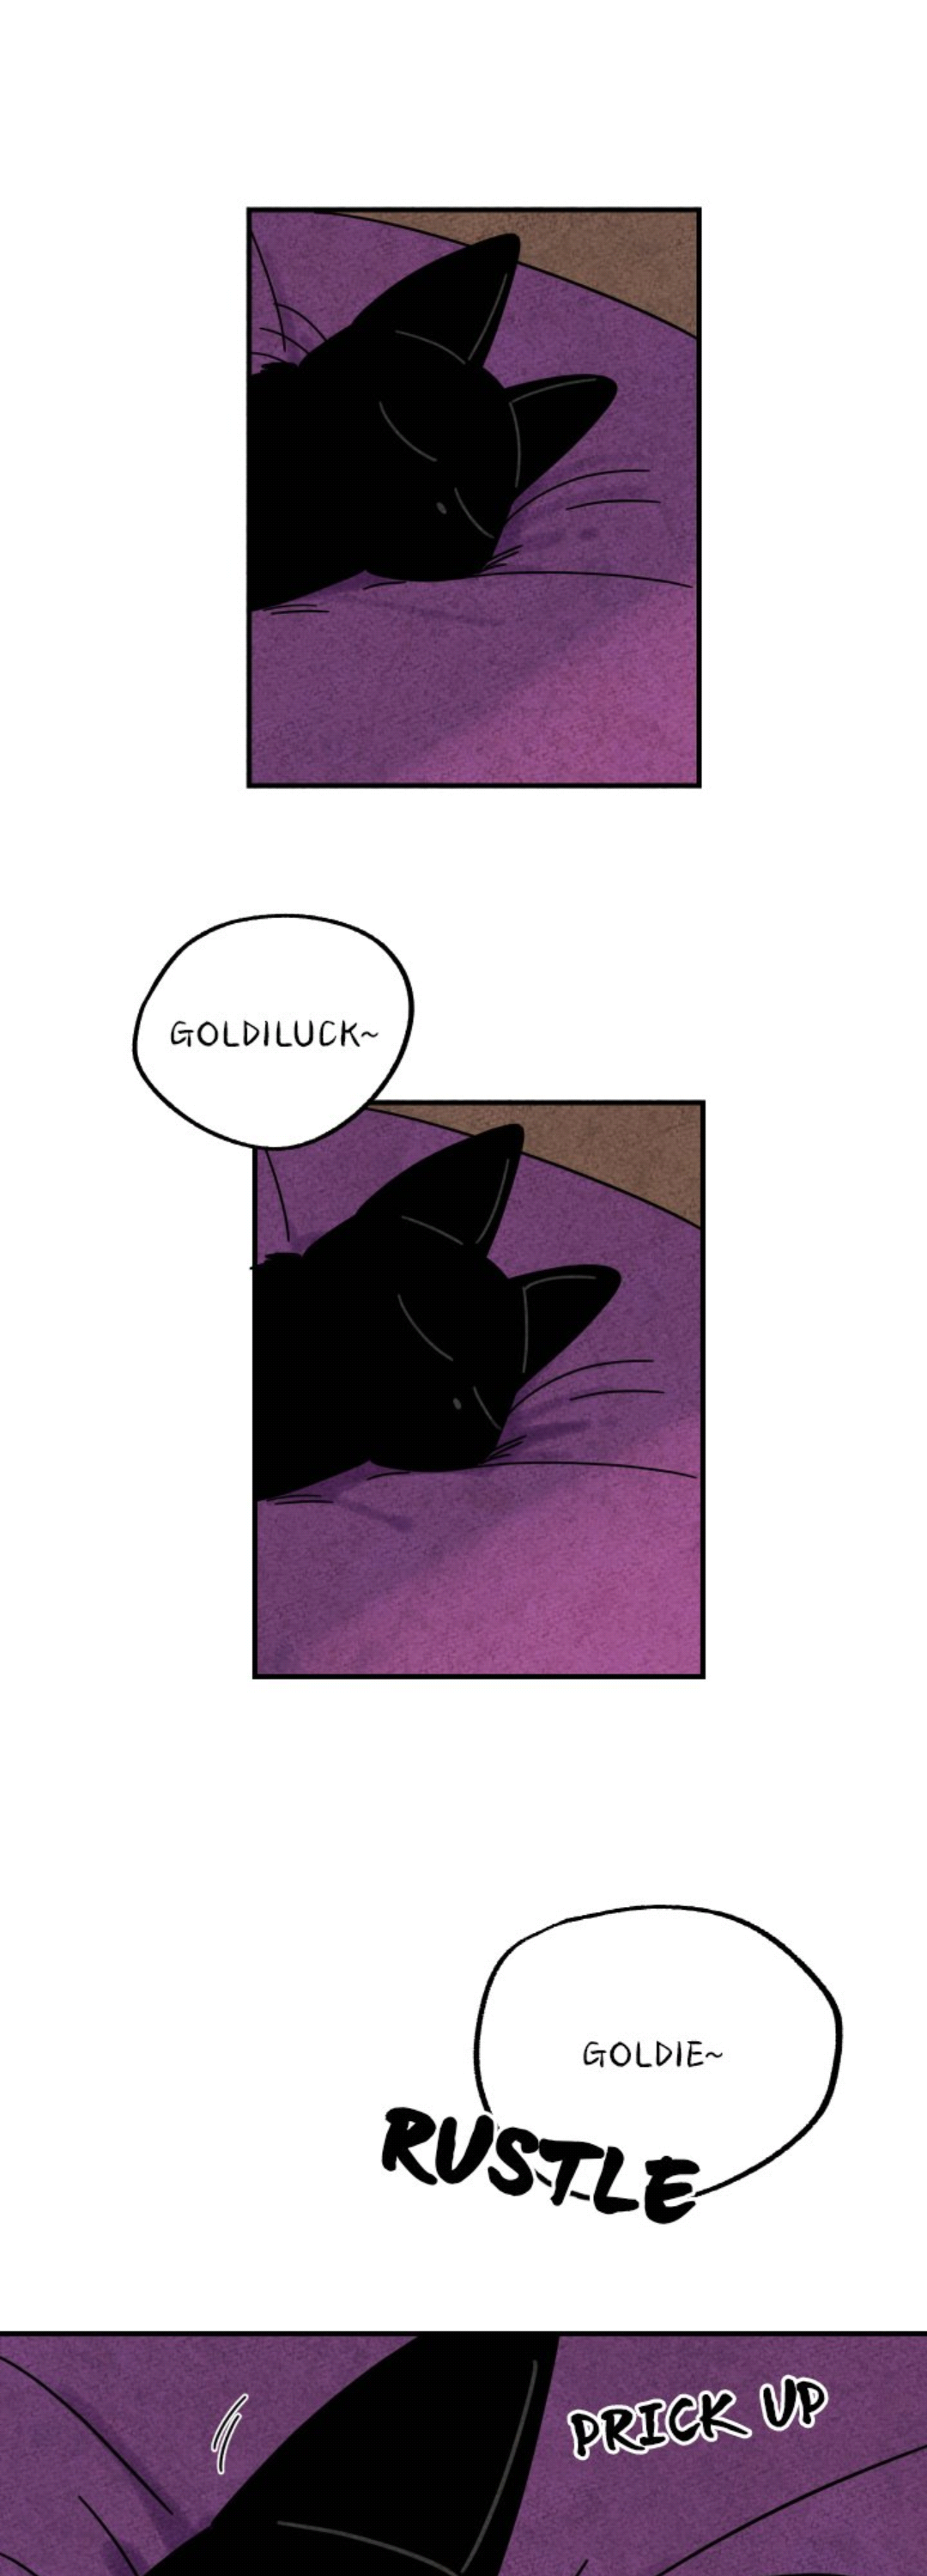 The Tale Of Goldiluck, The Black Kitten - Page 2